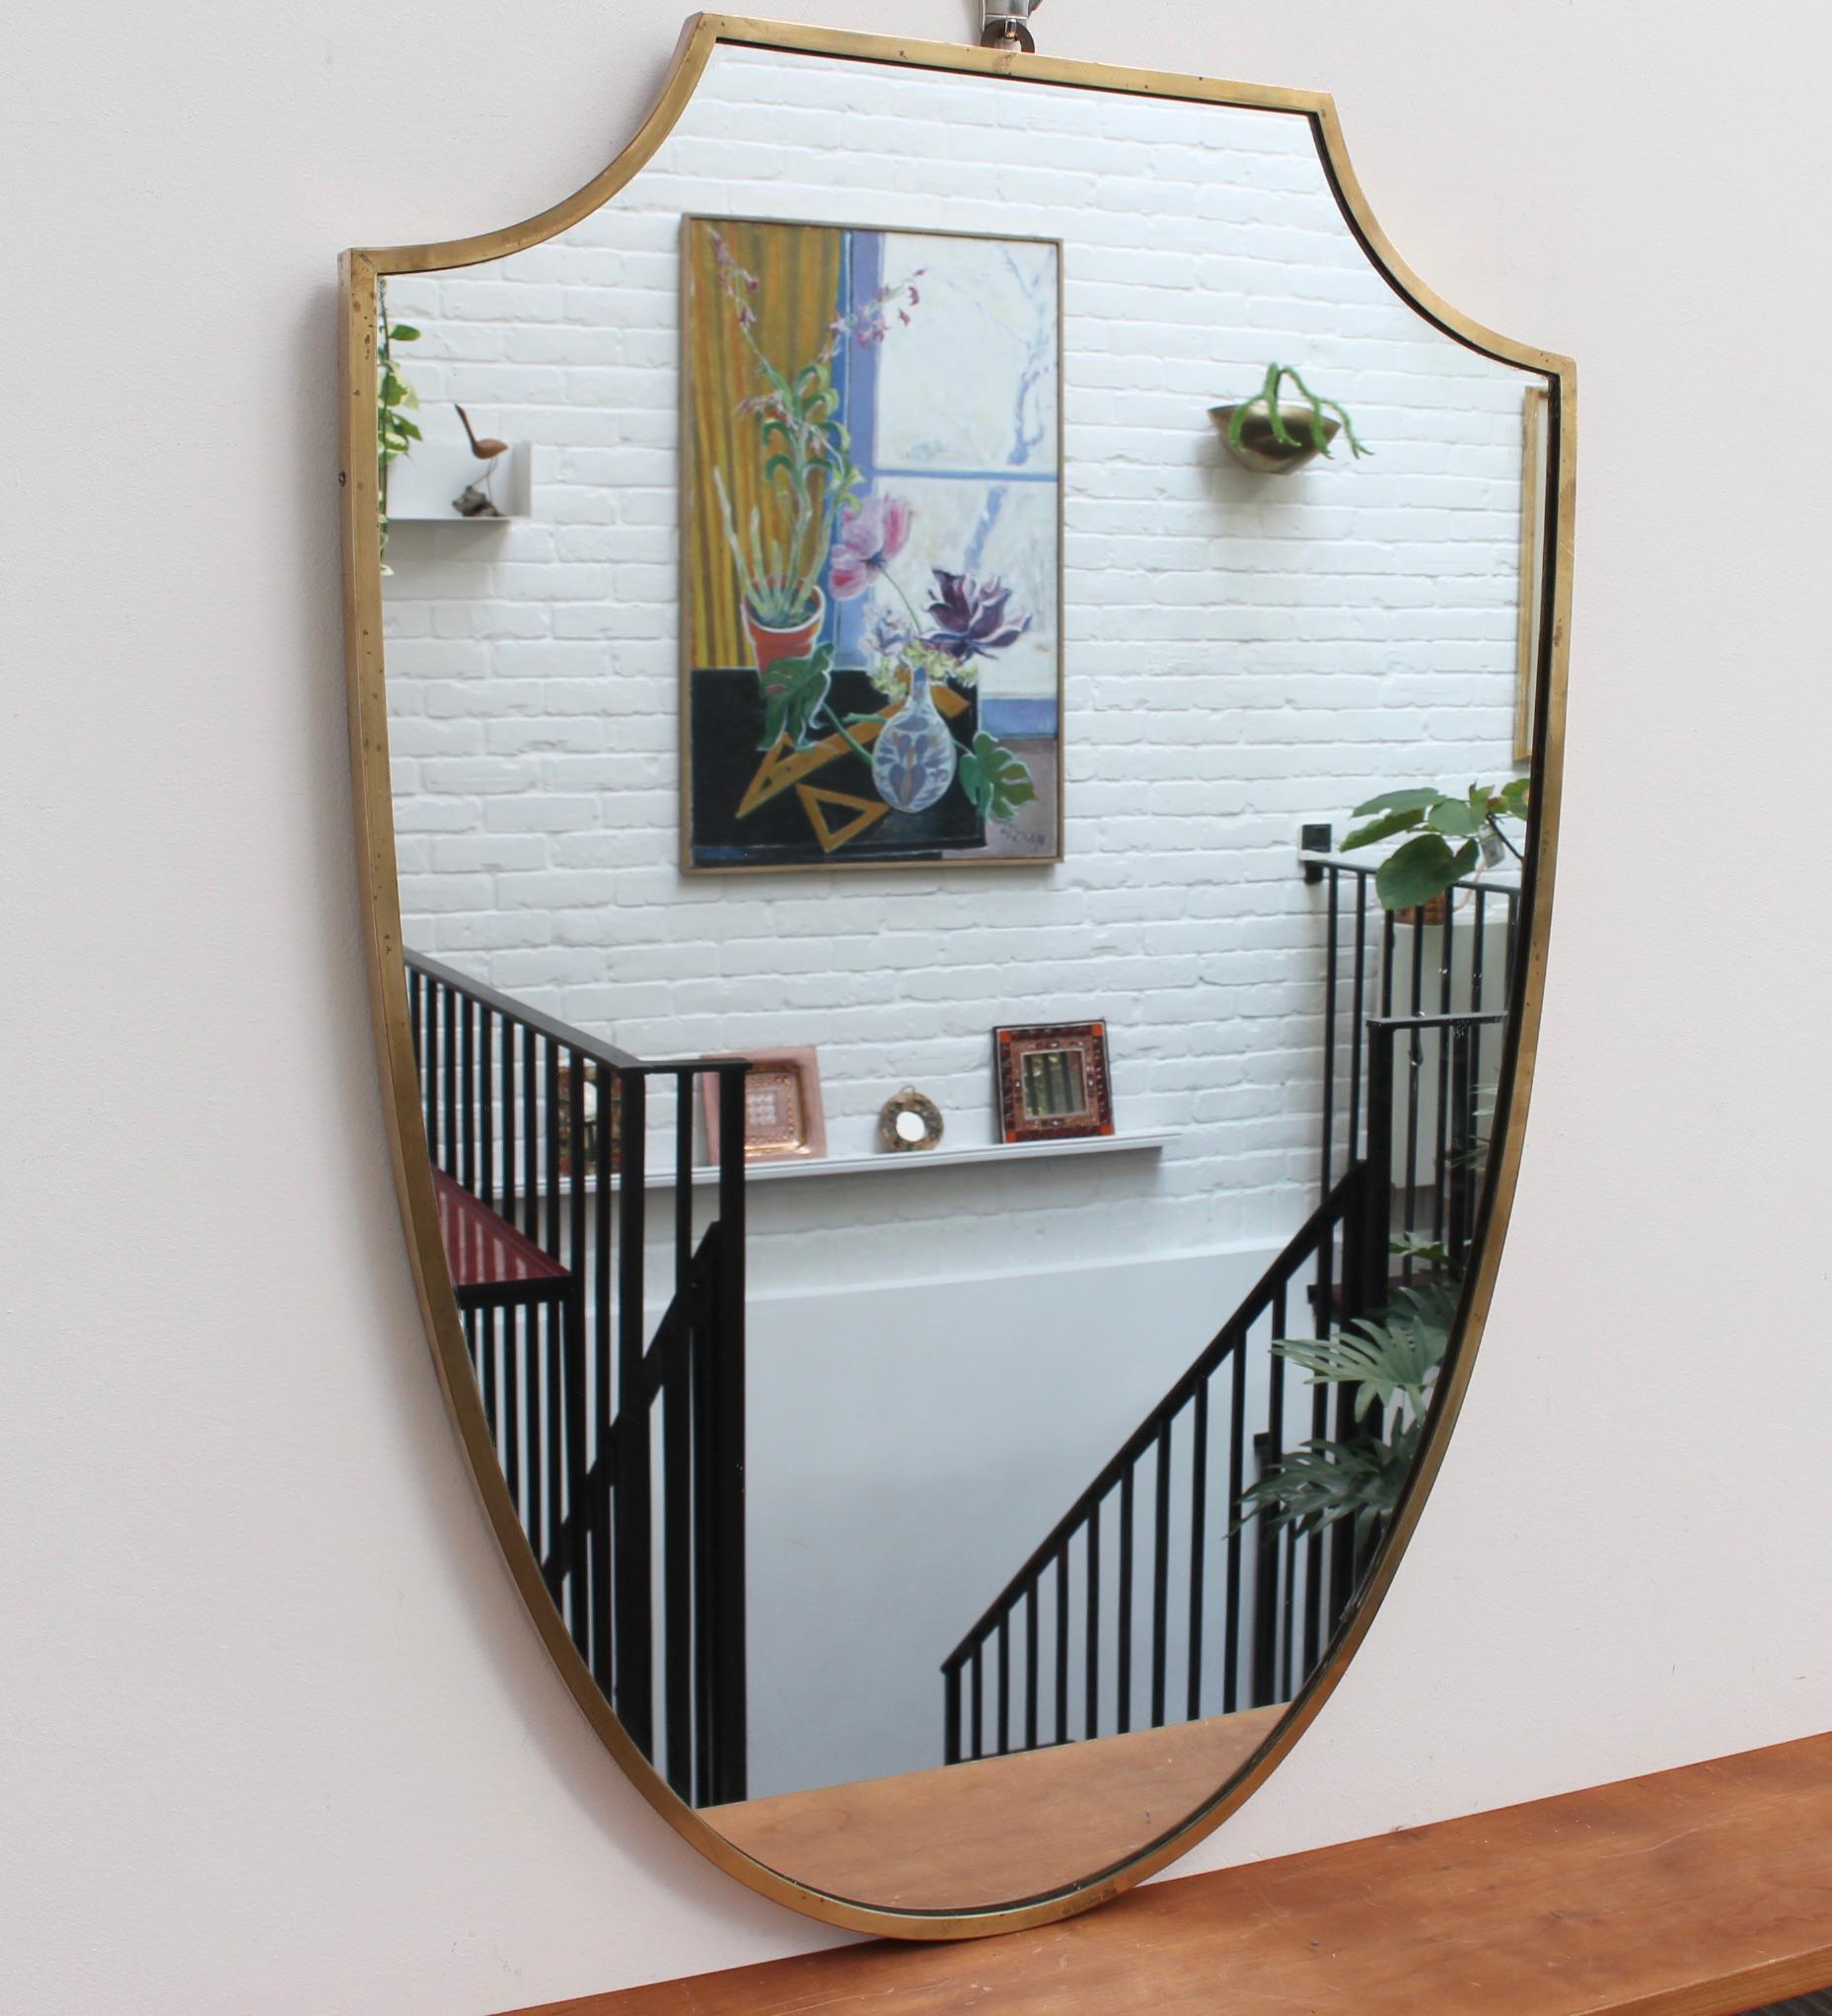 Midcentury Italian wall mirror with brass frame (circa 1950s). The mirror is substantial, crest-shaped - classically elegant in a modern Gio Ponti style. The piece is in overall good vintage condition with aged patina and some characterful